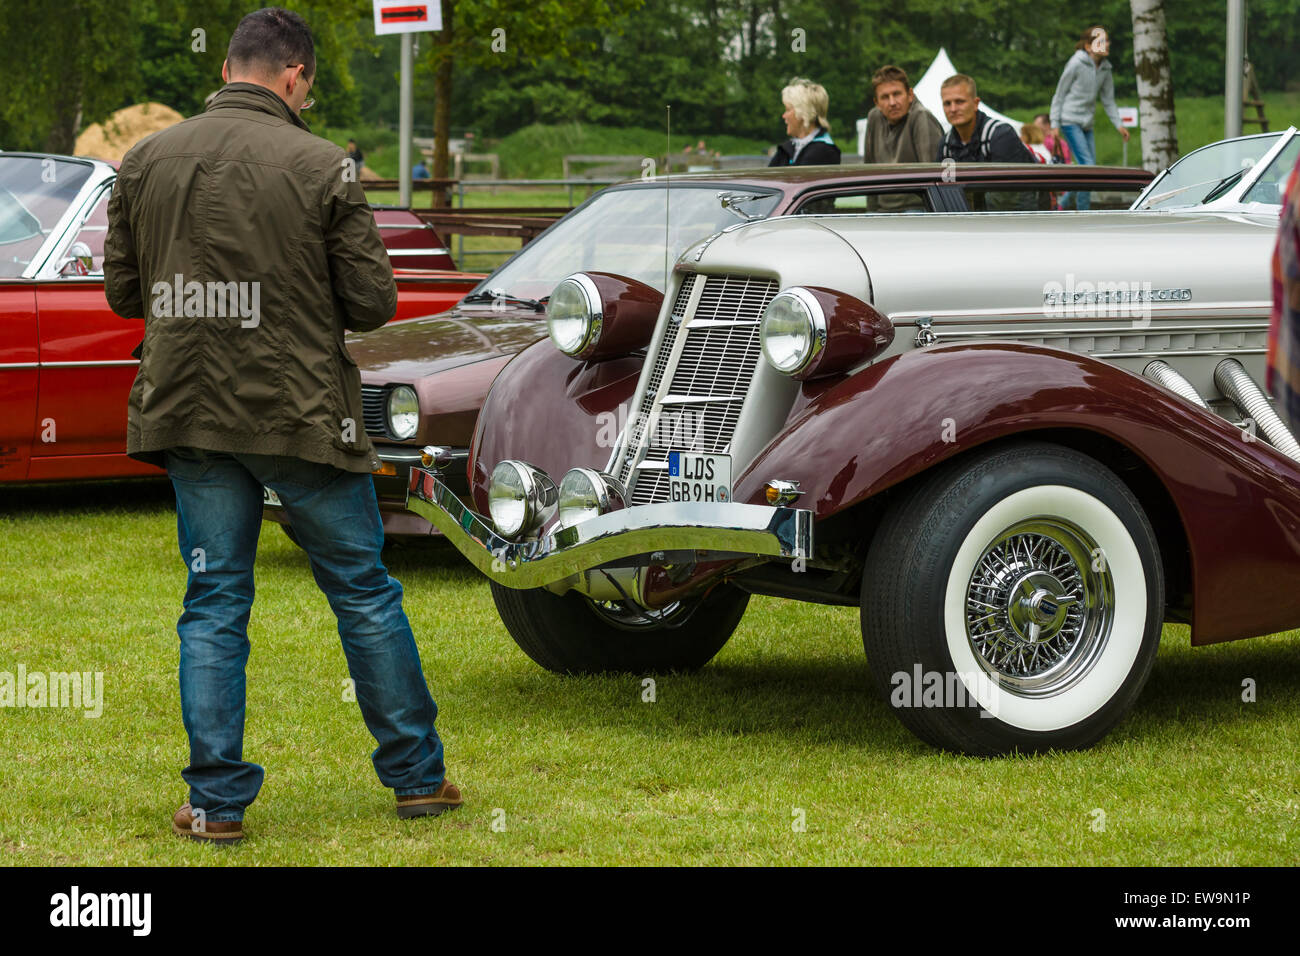 PAAREN IM GLIEN, GERMANY - MAY 23, 2015: A man looks at vintage car Auburn 852 Speedster. The oldtimer show in MAFZ. Stock Photo